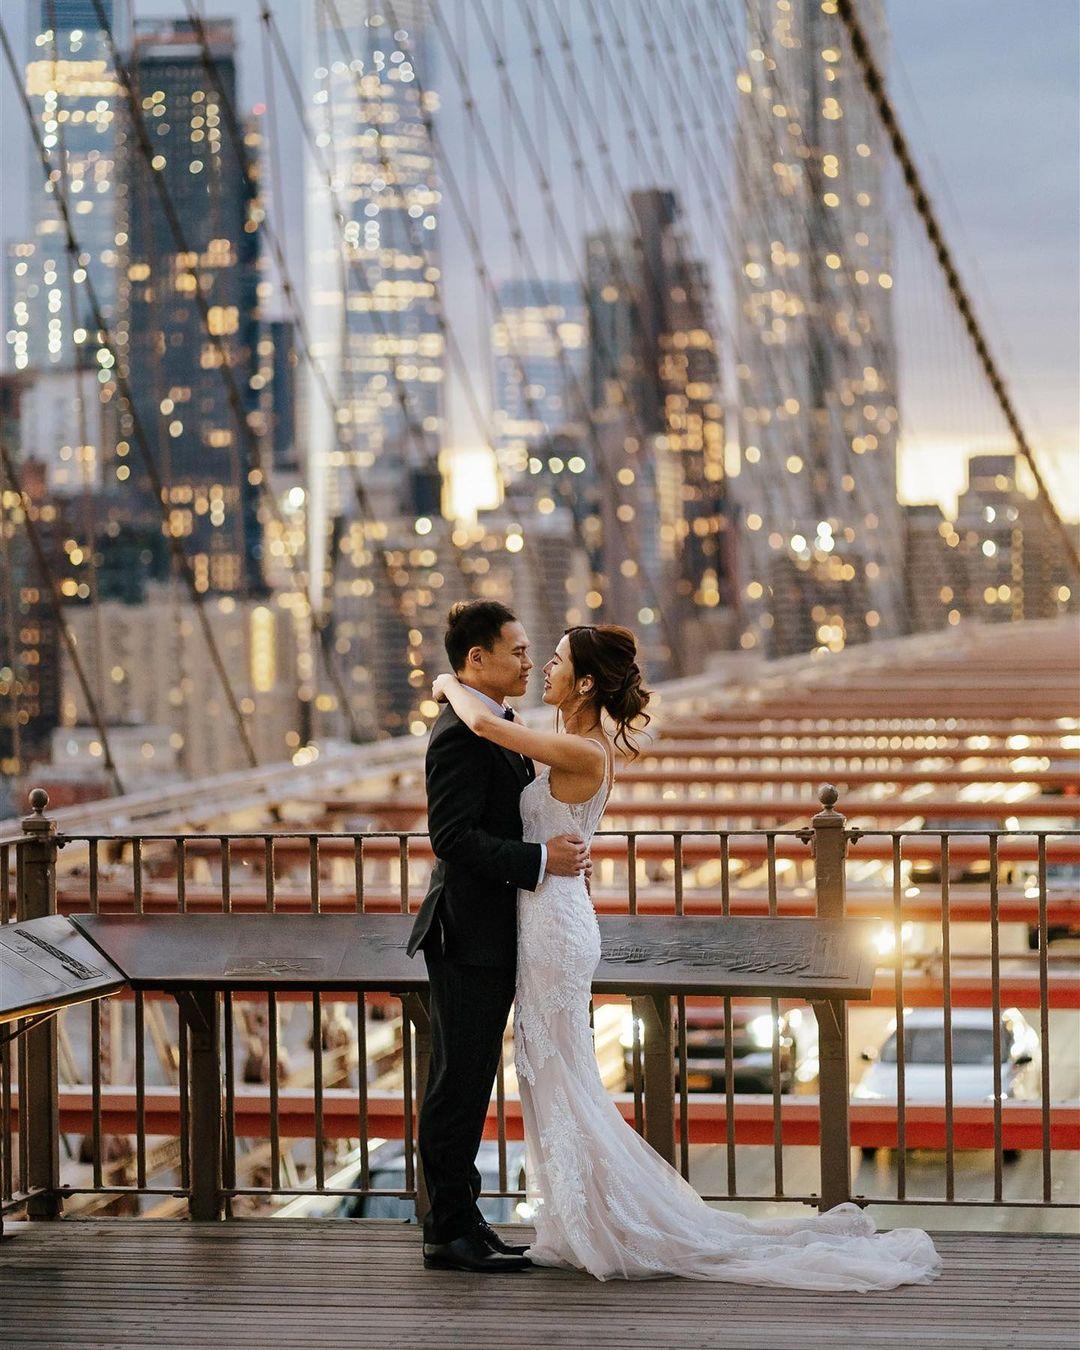 class="content__text"
 Magical sunset on the Brooklyn Bridge 🖤
⠀
 #brooklynbridge #brooklynbridgewedding #brooklynbridgeengagement #brooklynbridgephotoshoot #dumbowedding #dumboengagement #nycweddingphotographer #nycwedding #newyorkweddingphotographer #newyorkwedding #ig_nycity #icapture_nyc #thebigapple #nyclife #nyclifestyle #nyc_explorers 
 